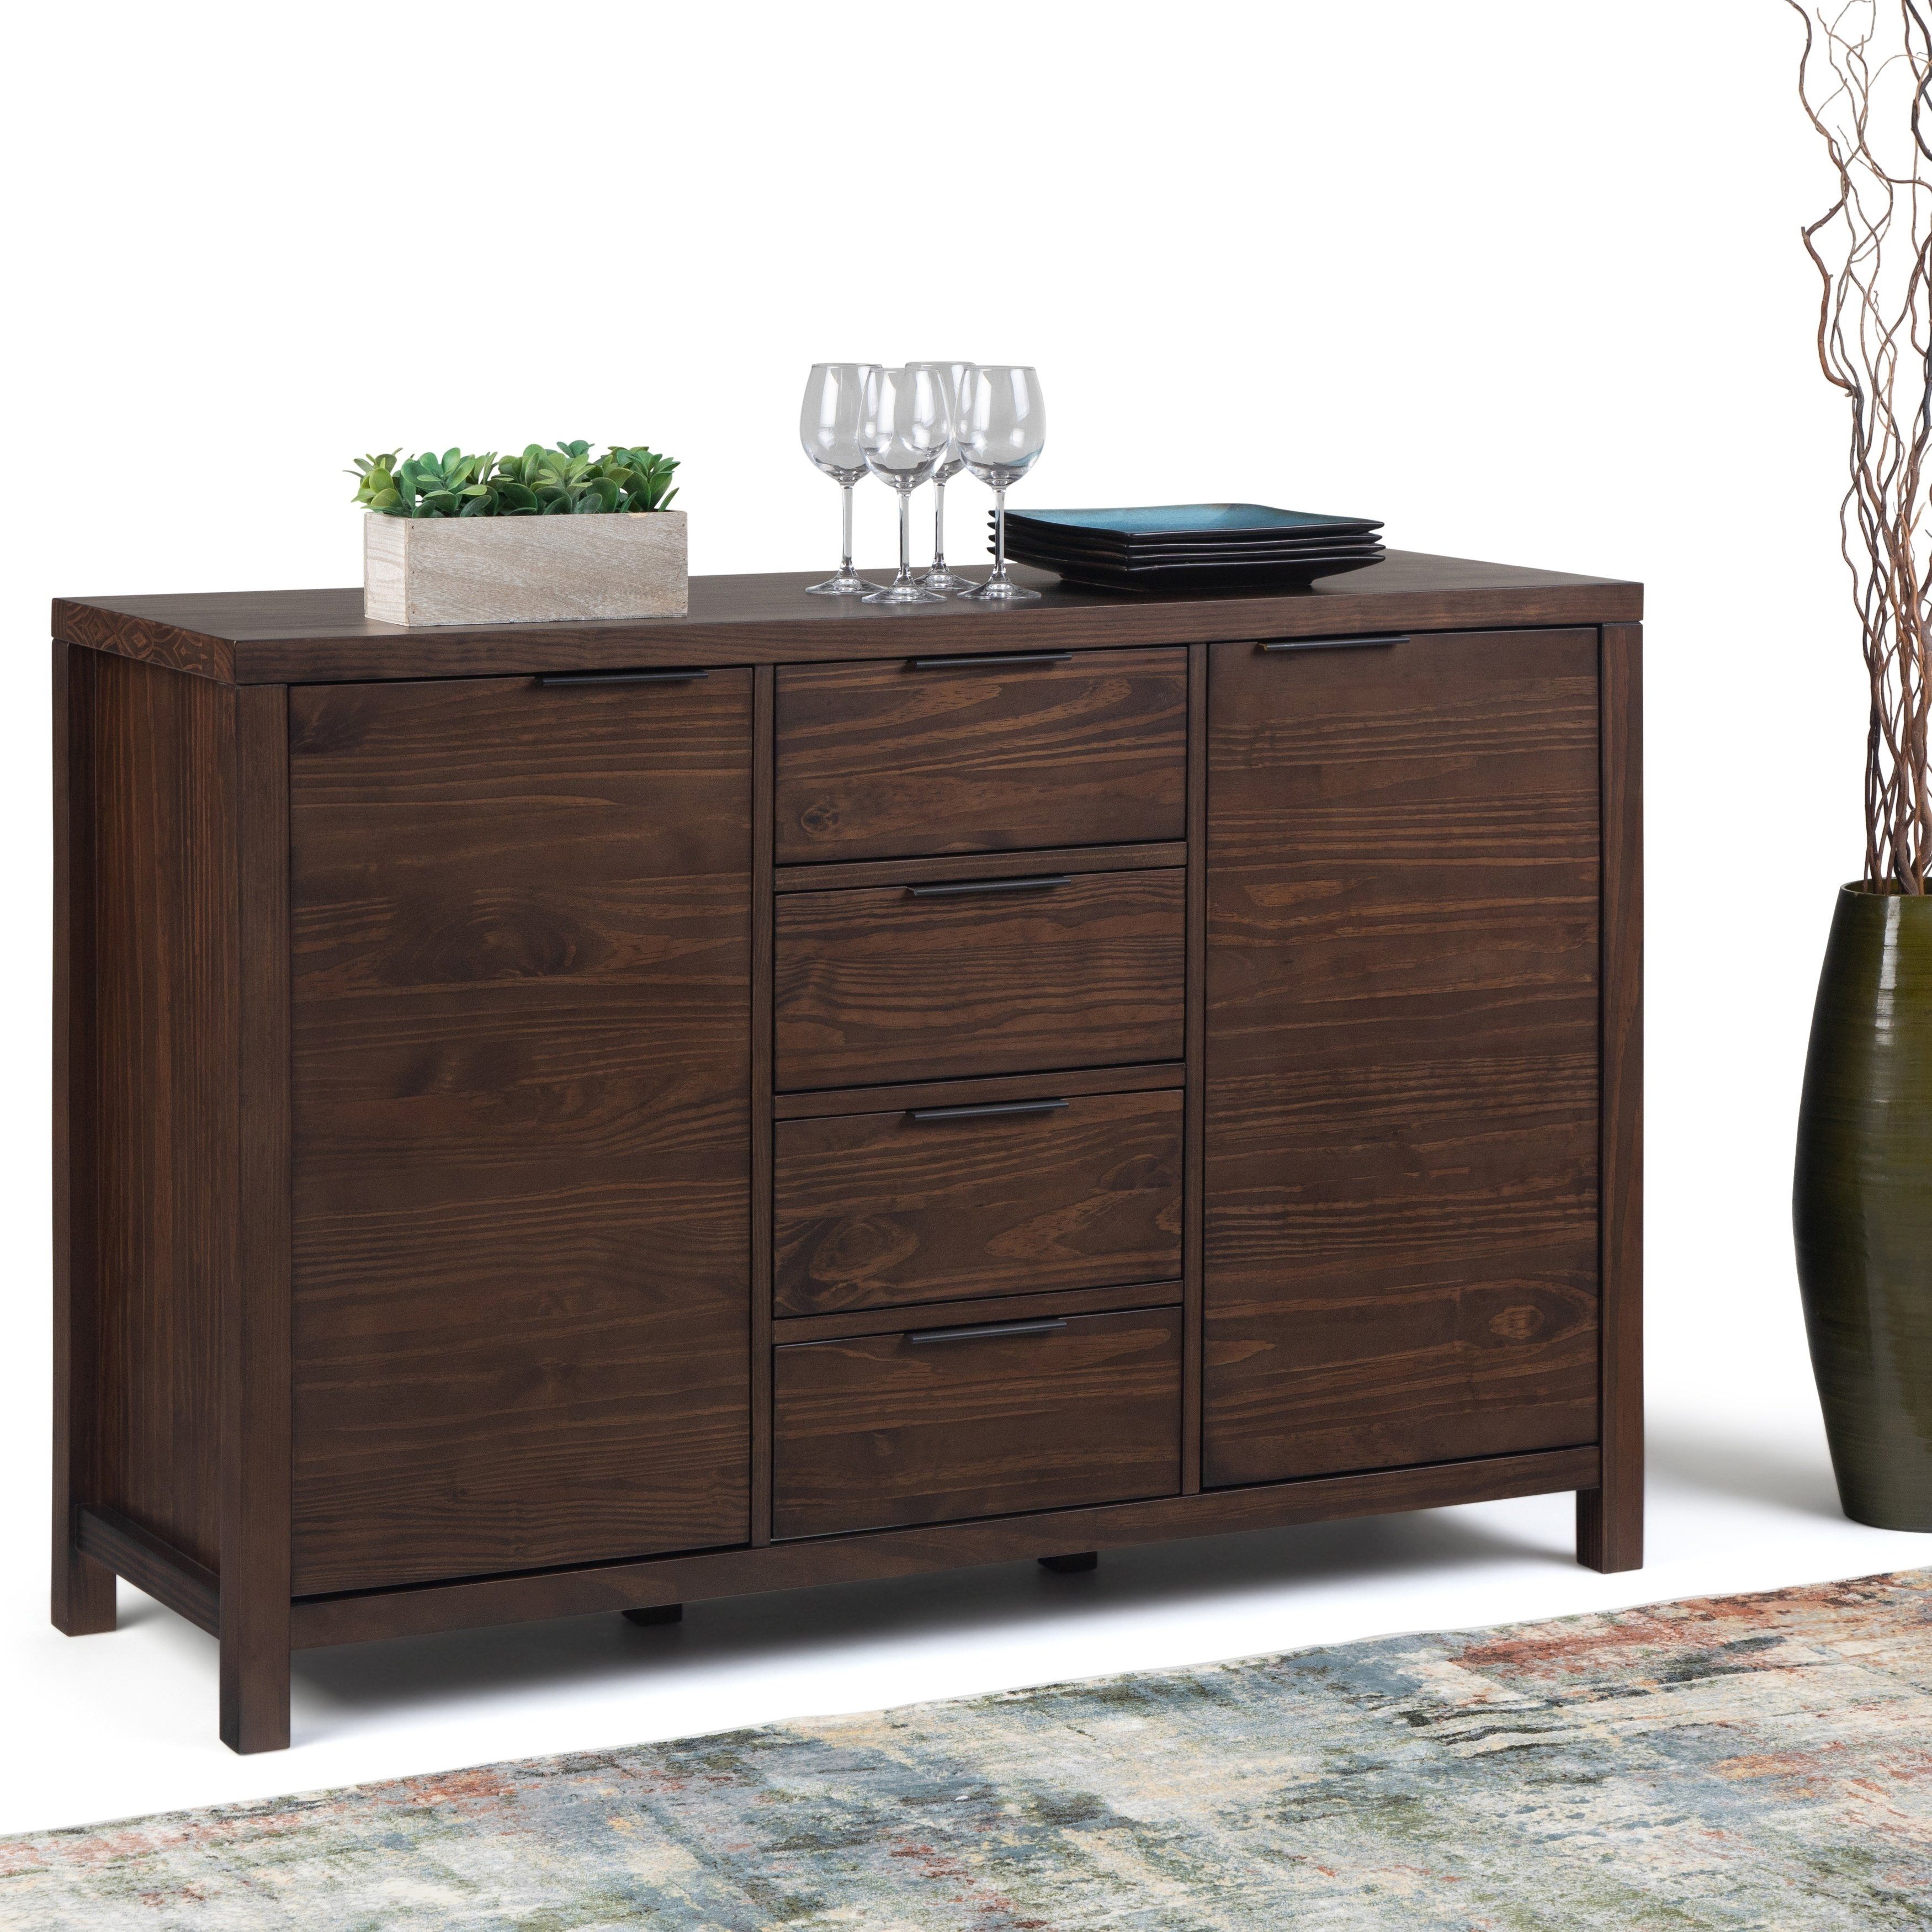 Wyndenhall Fabian Solid Wood 54 Inch Wide Modern Within Solid Wood Contemporary Sideboards Buffets (Photo 3 of 30)